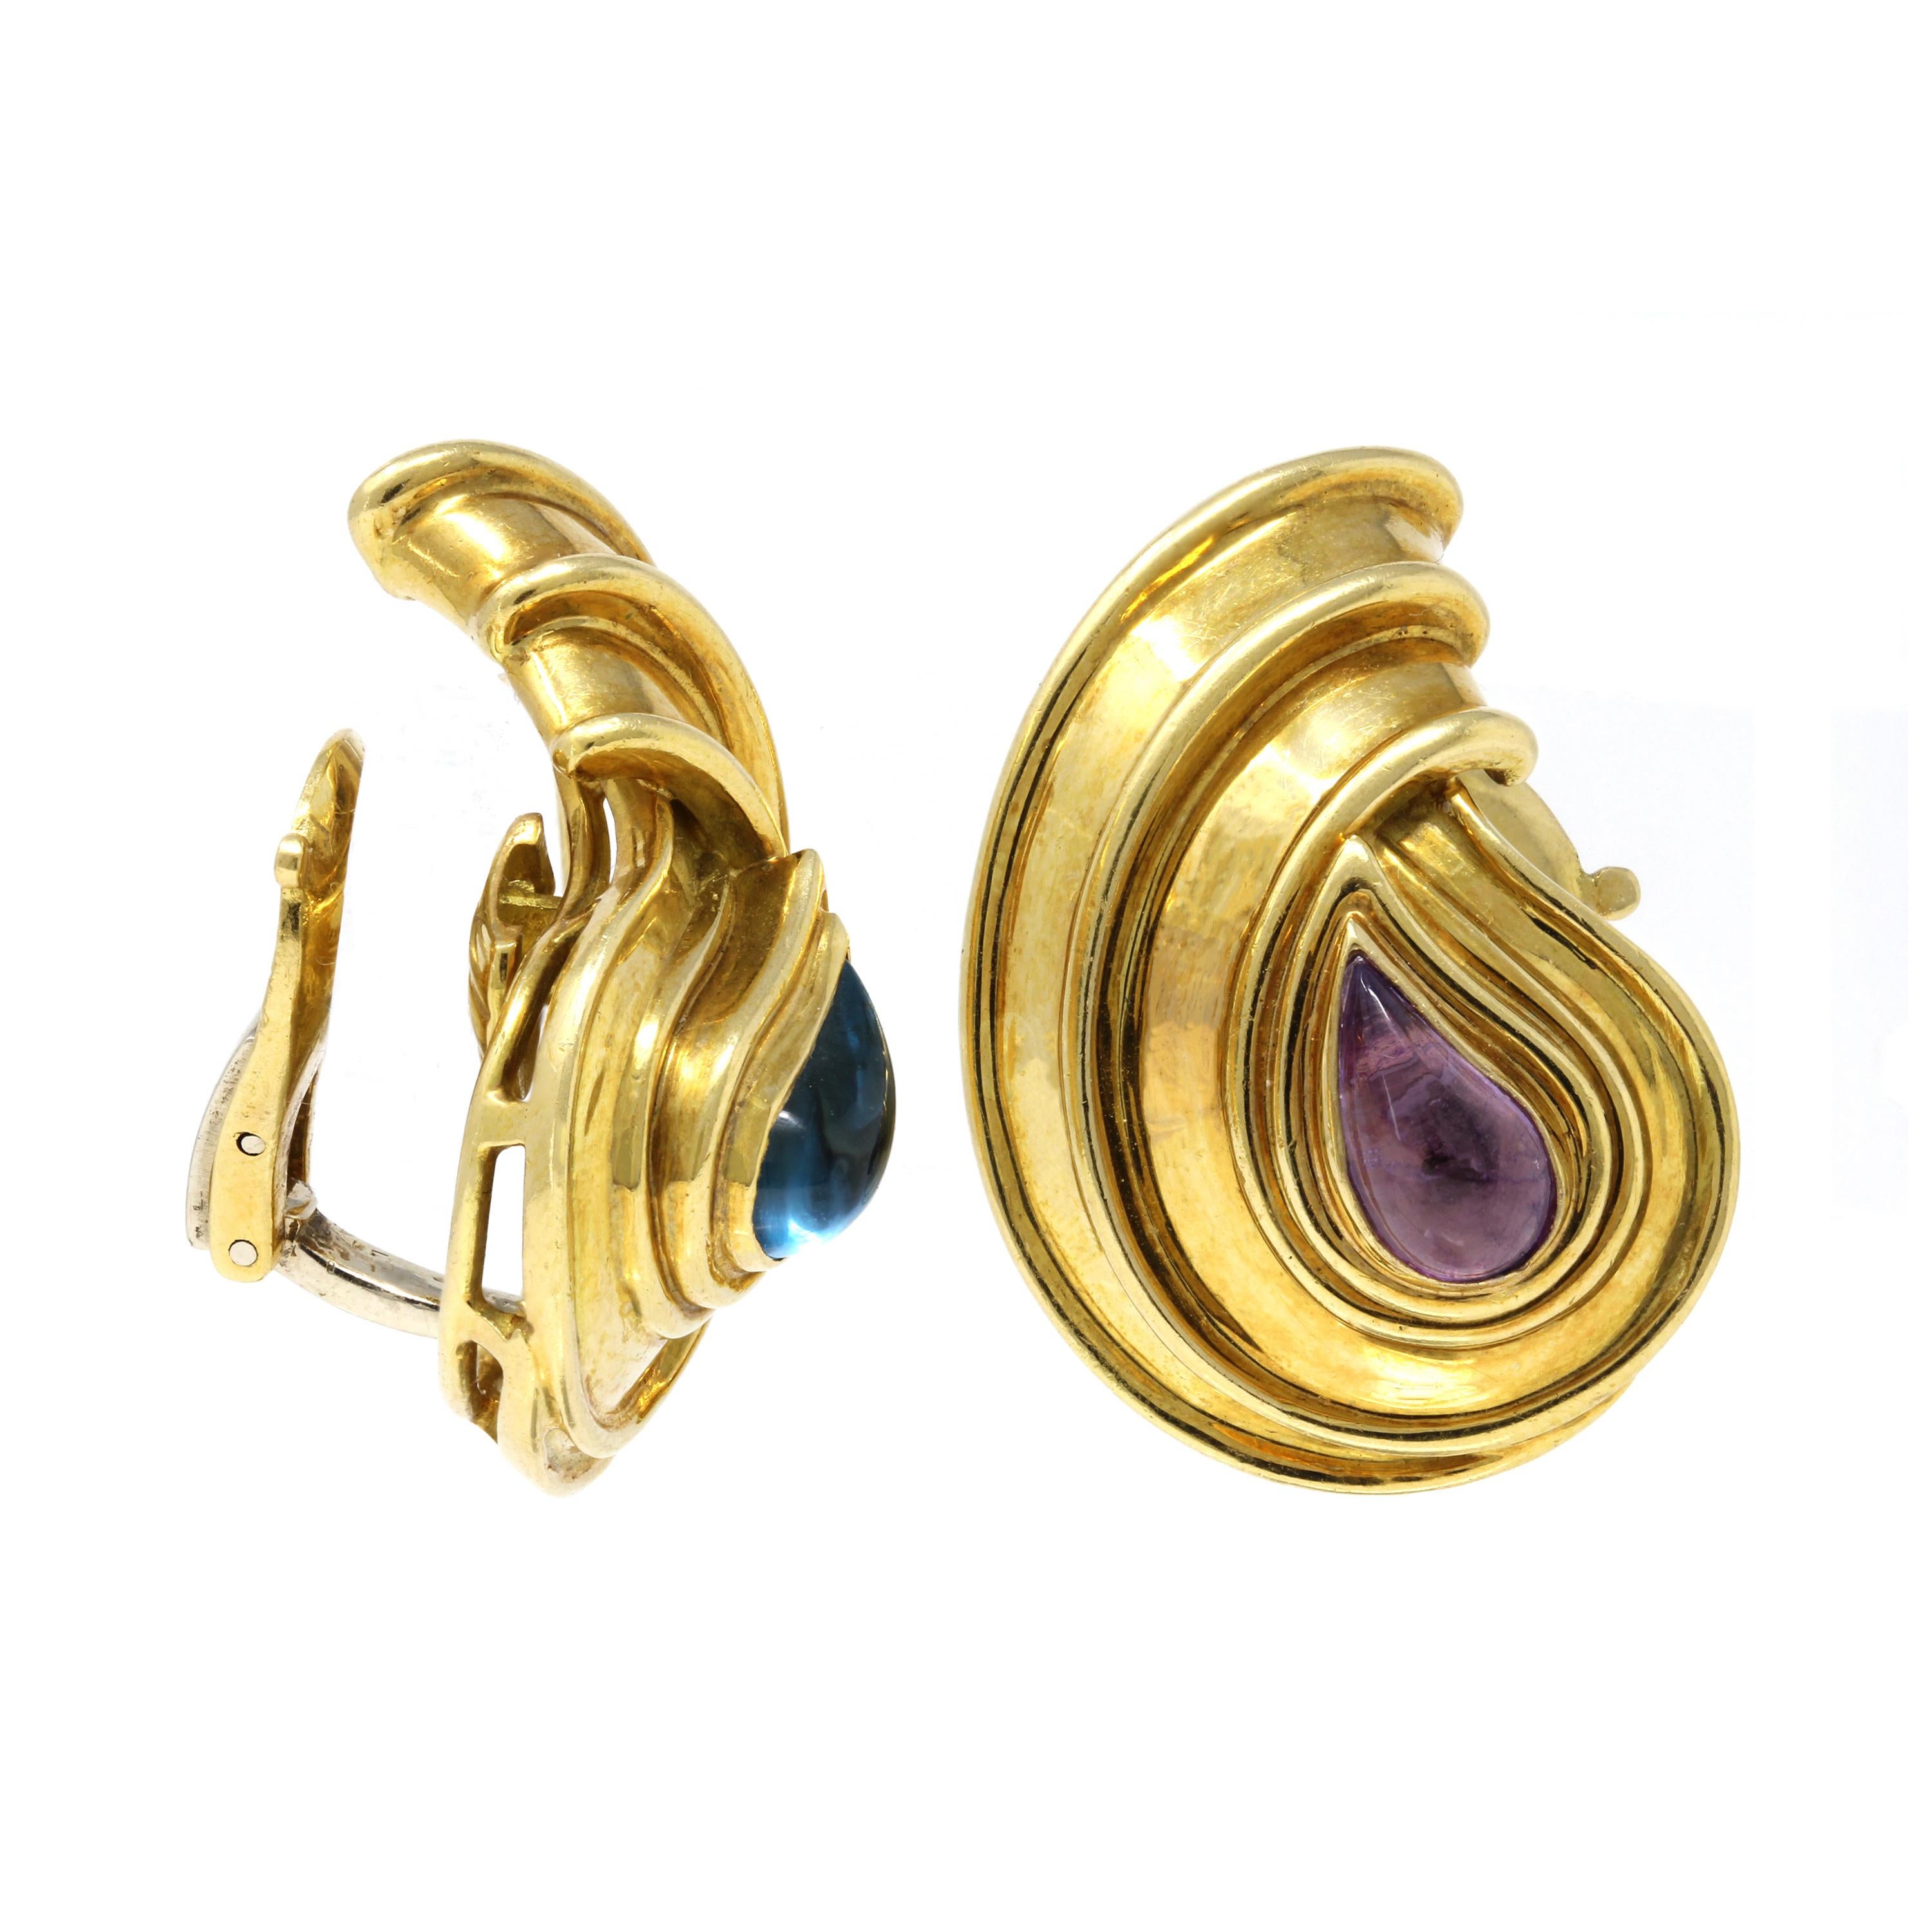 A signed Chopard missmatched gemstones clip on earrings from the early Casimir collection circa 1990. designed as  a paisley motif. One earring features a polished aquamarine while the other has an amethyst. Both gemstones are cut to follow the